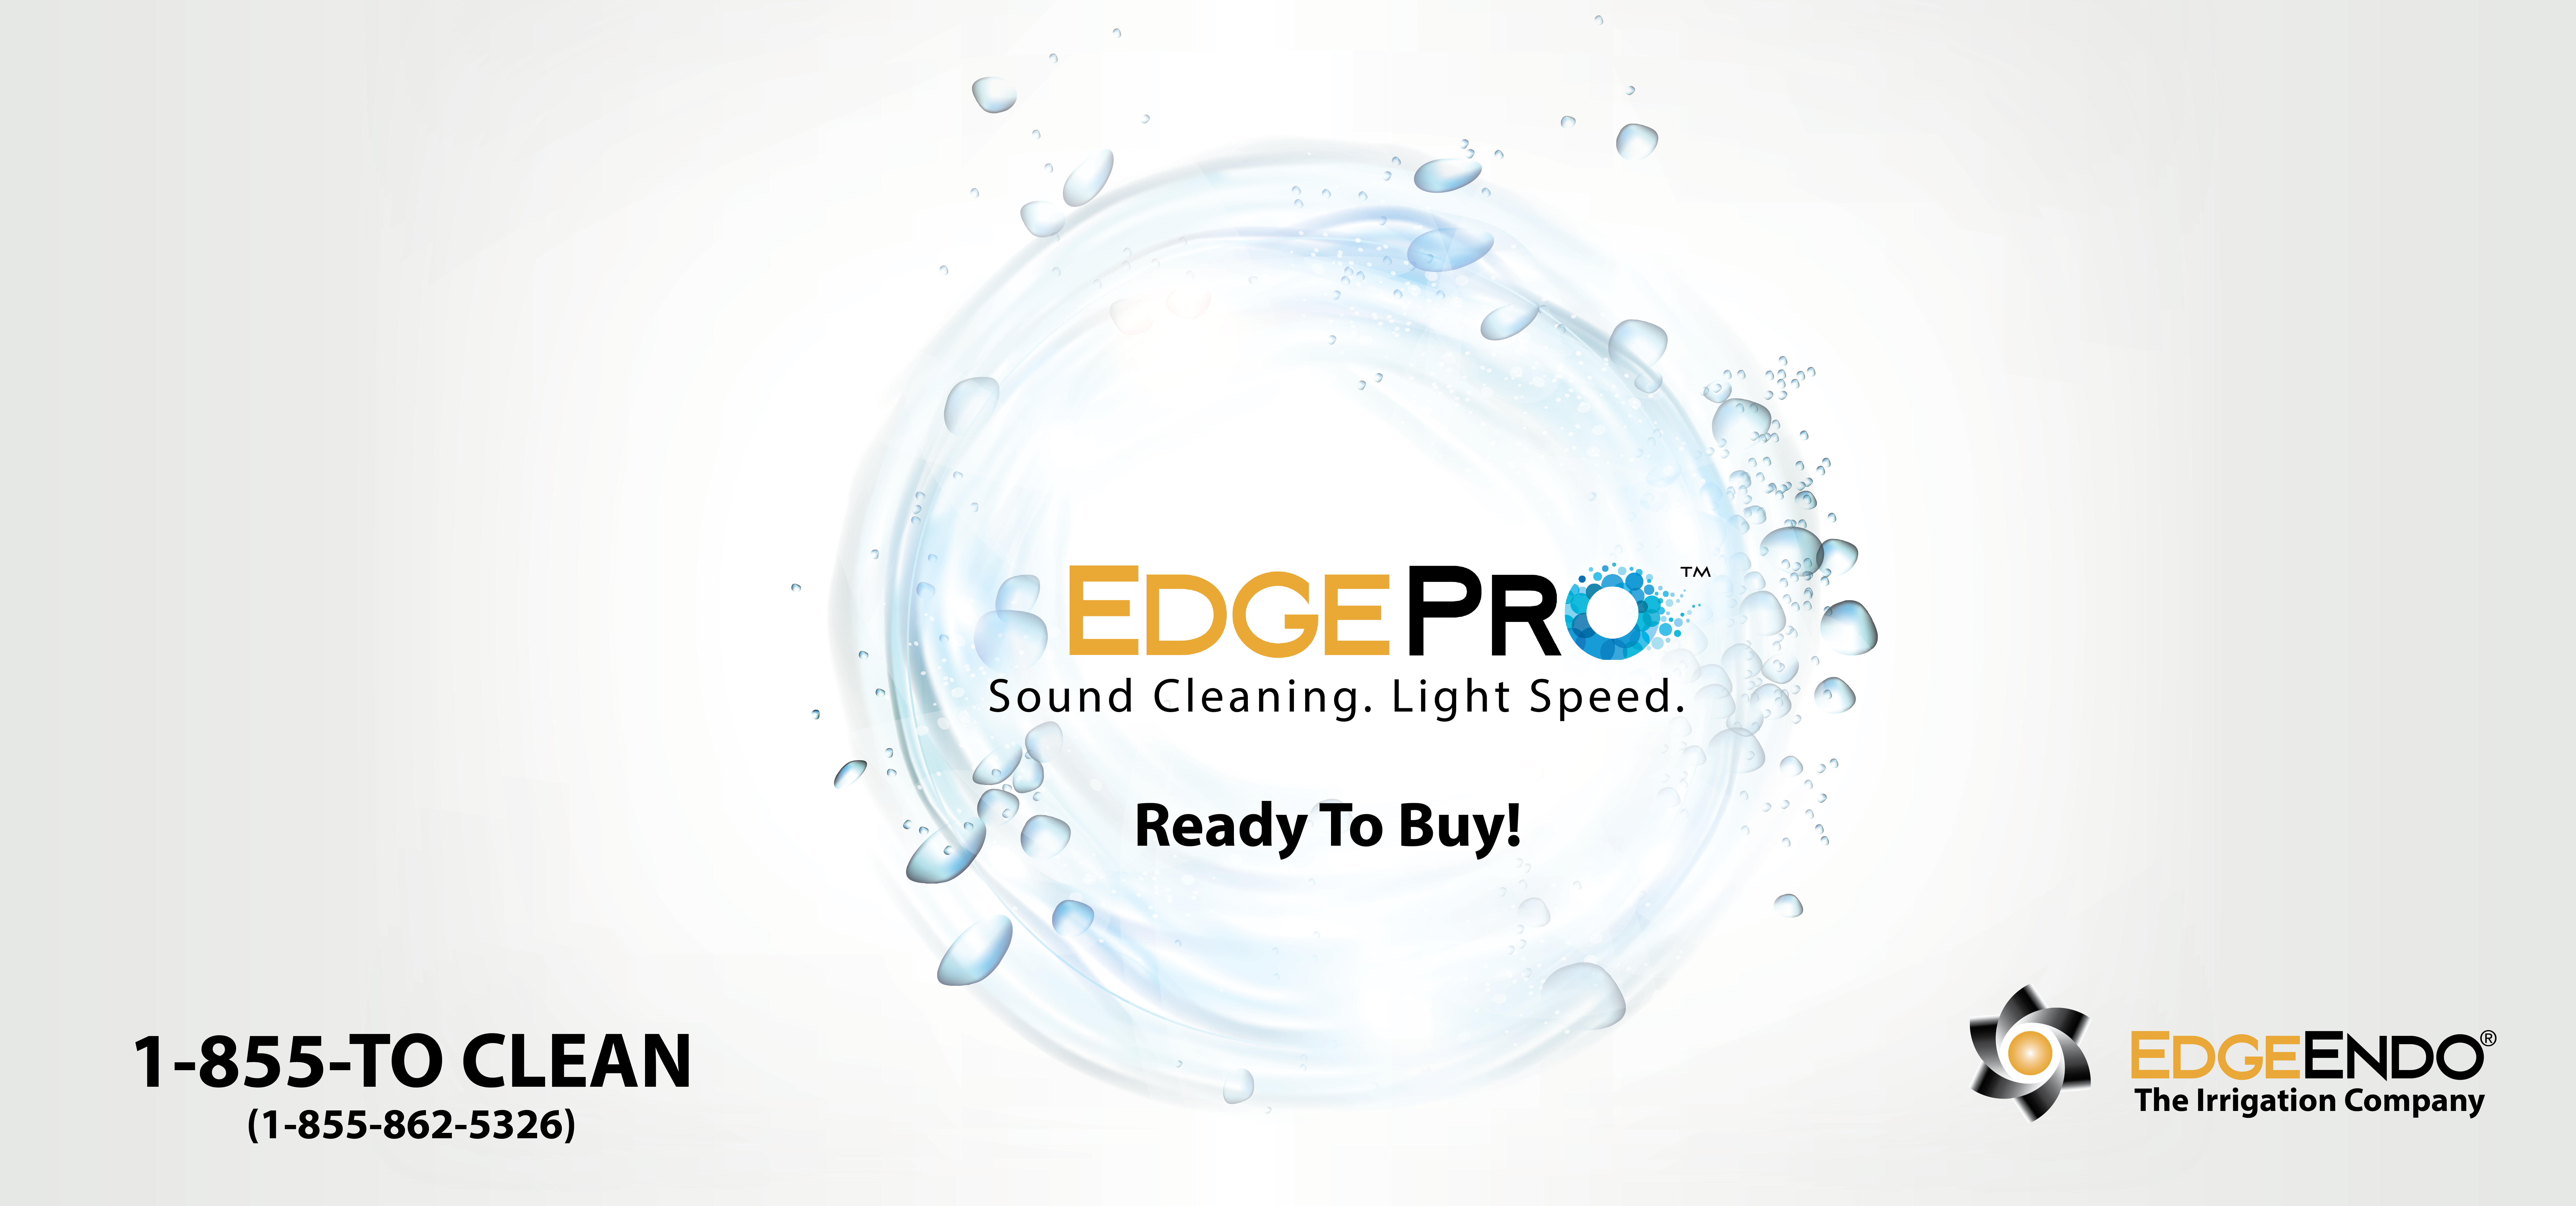 edgepro logo on top of water droplet splash and the text 'sound cleaning. light speed."